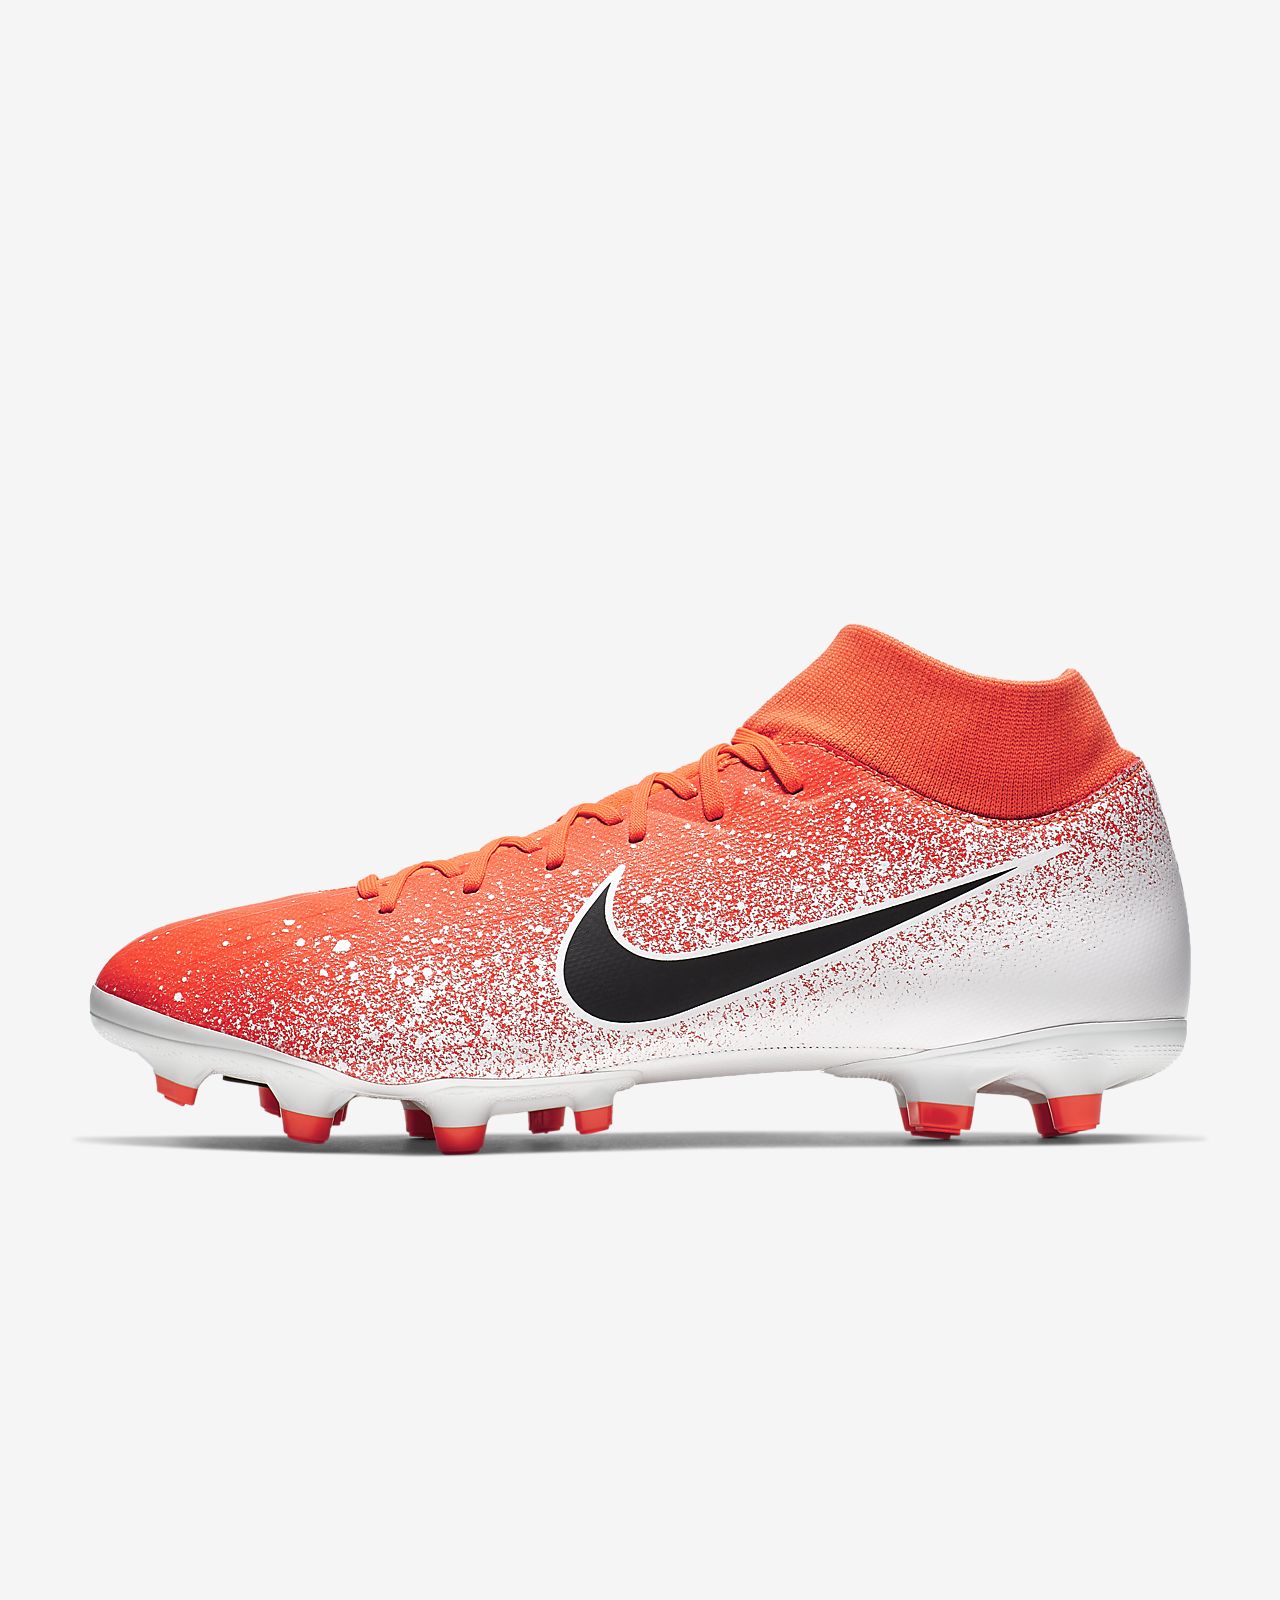 Nike Mercurial Superfly VI Academy MG 'Game Over Pack